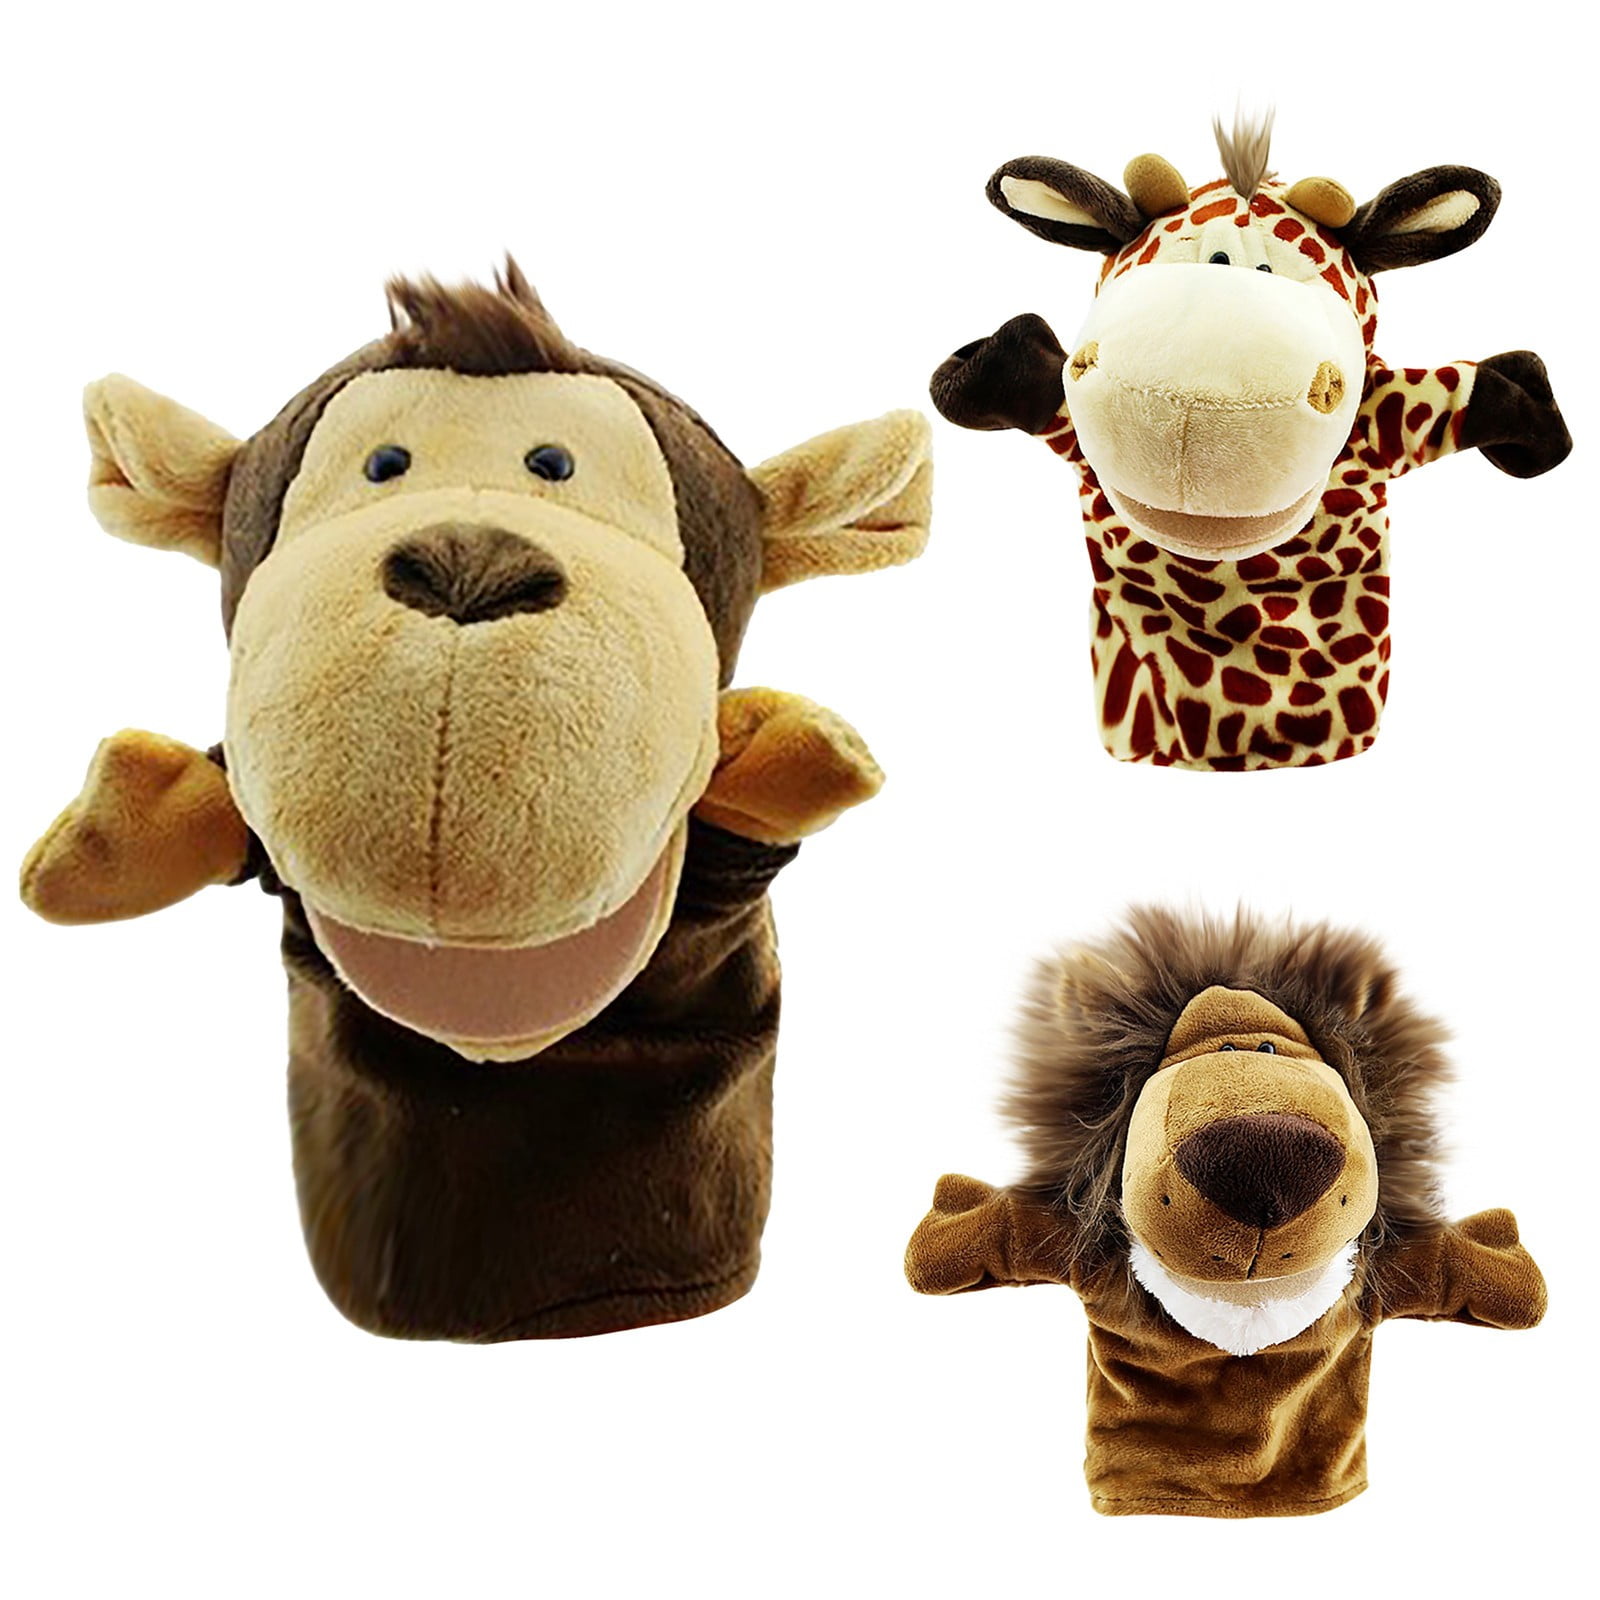 Kid Hand Puppet Toy Giraffe & Wolf with Working Mouth for Imaginative Play 